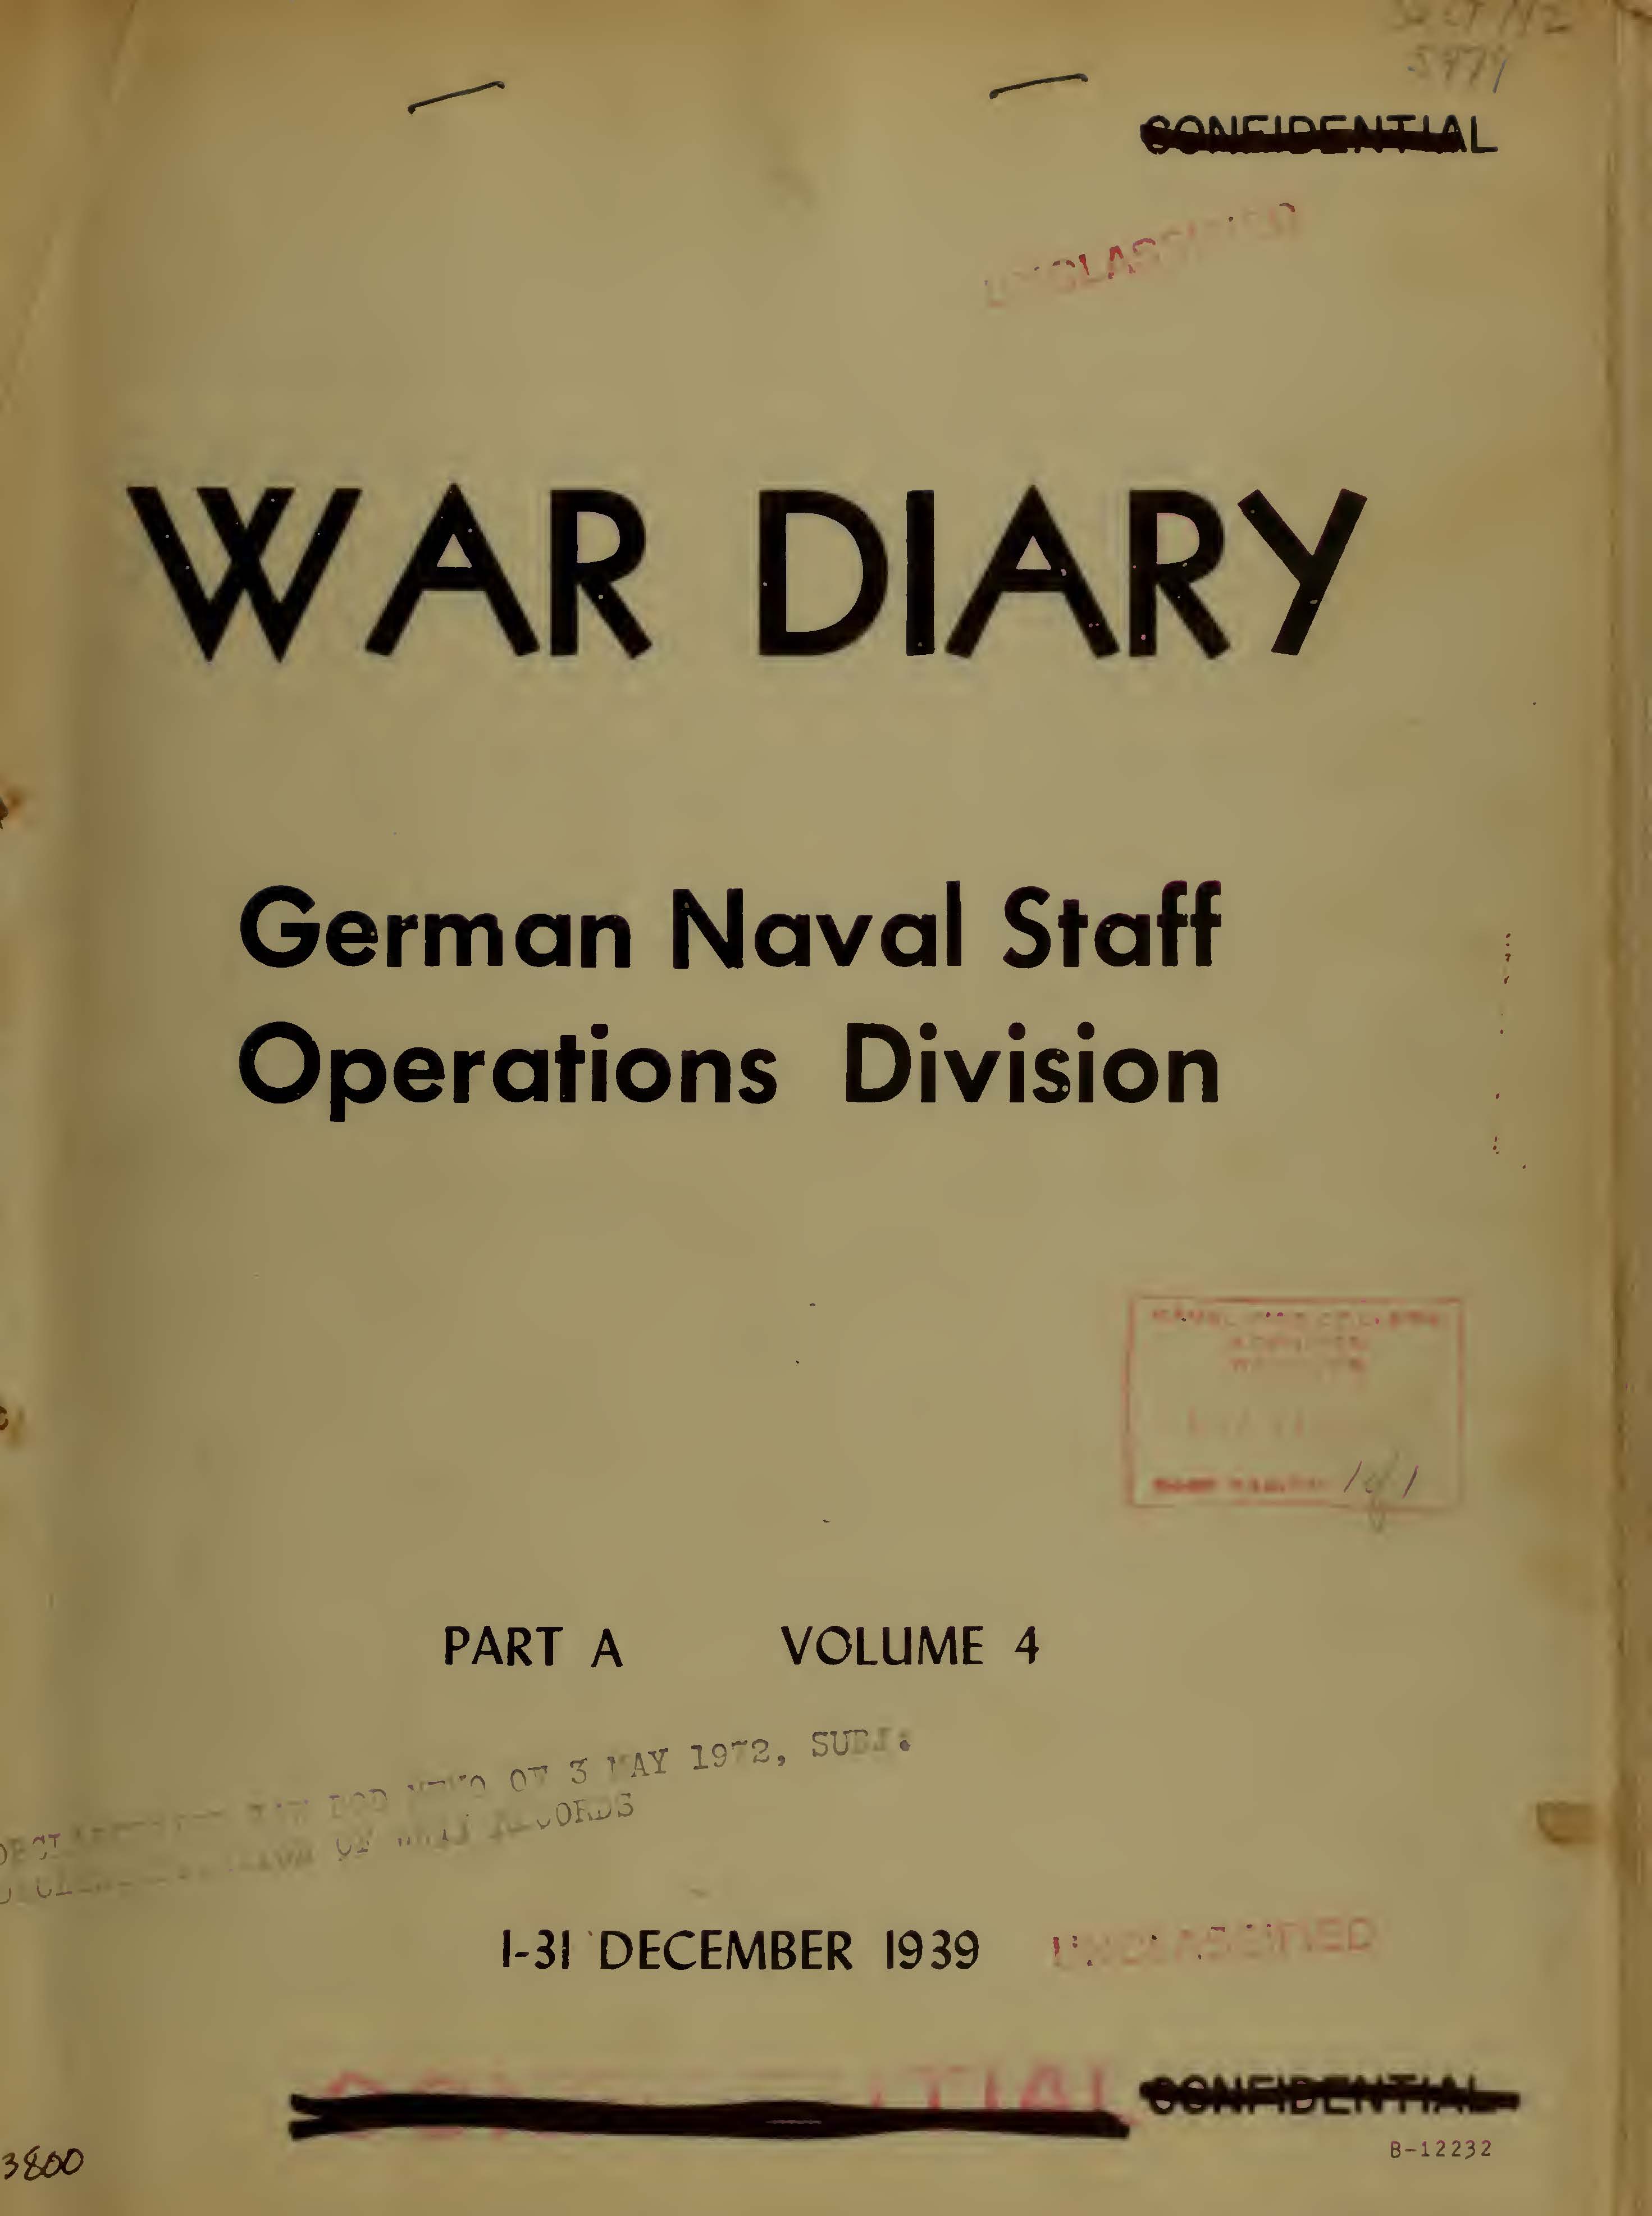 War Diary of German Naval Staff (Operations Division) Part A, Volume 4, 1-31 December 1939